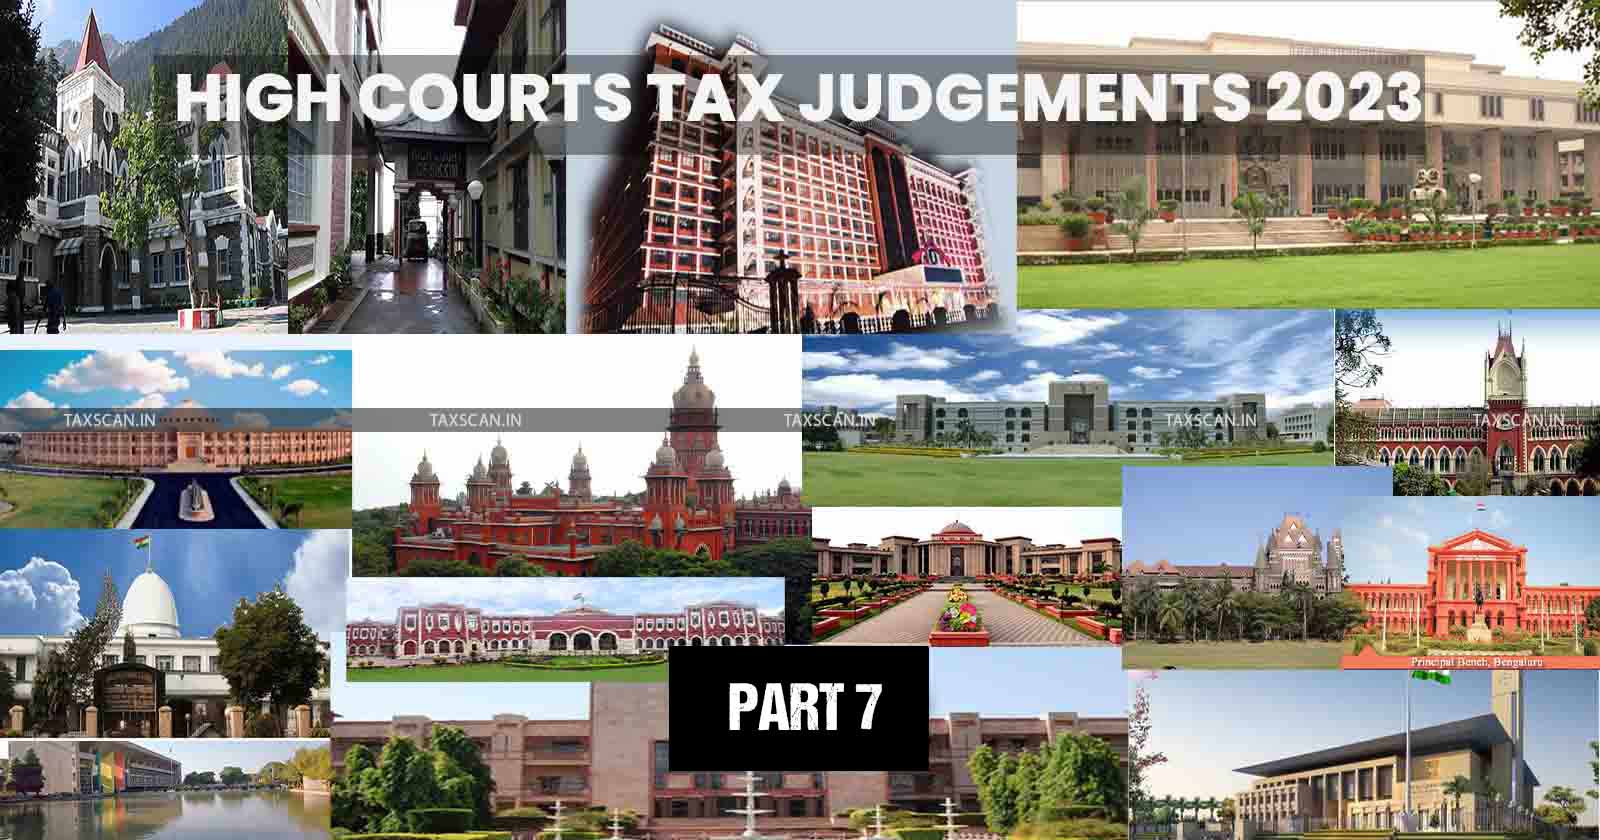 Tax Judgment of HC - Taxscan Annual Digest - High Court Annual Digest - hc - high court - Tax Judgement - TAXSCAN